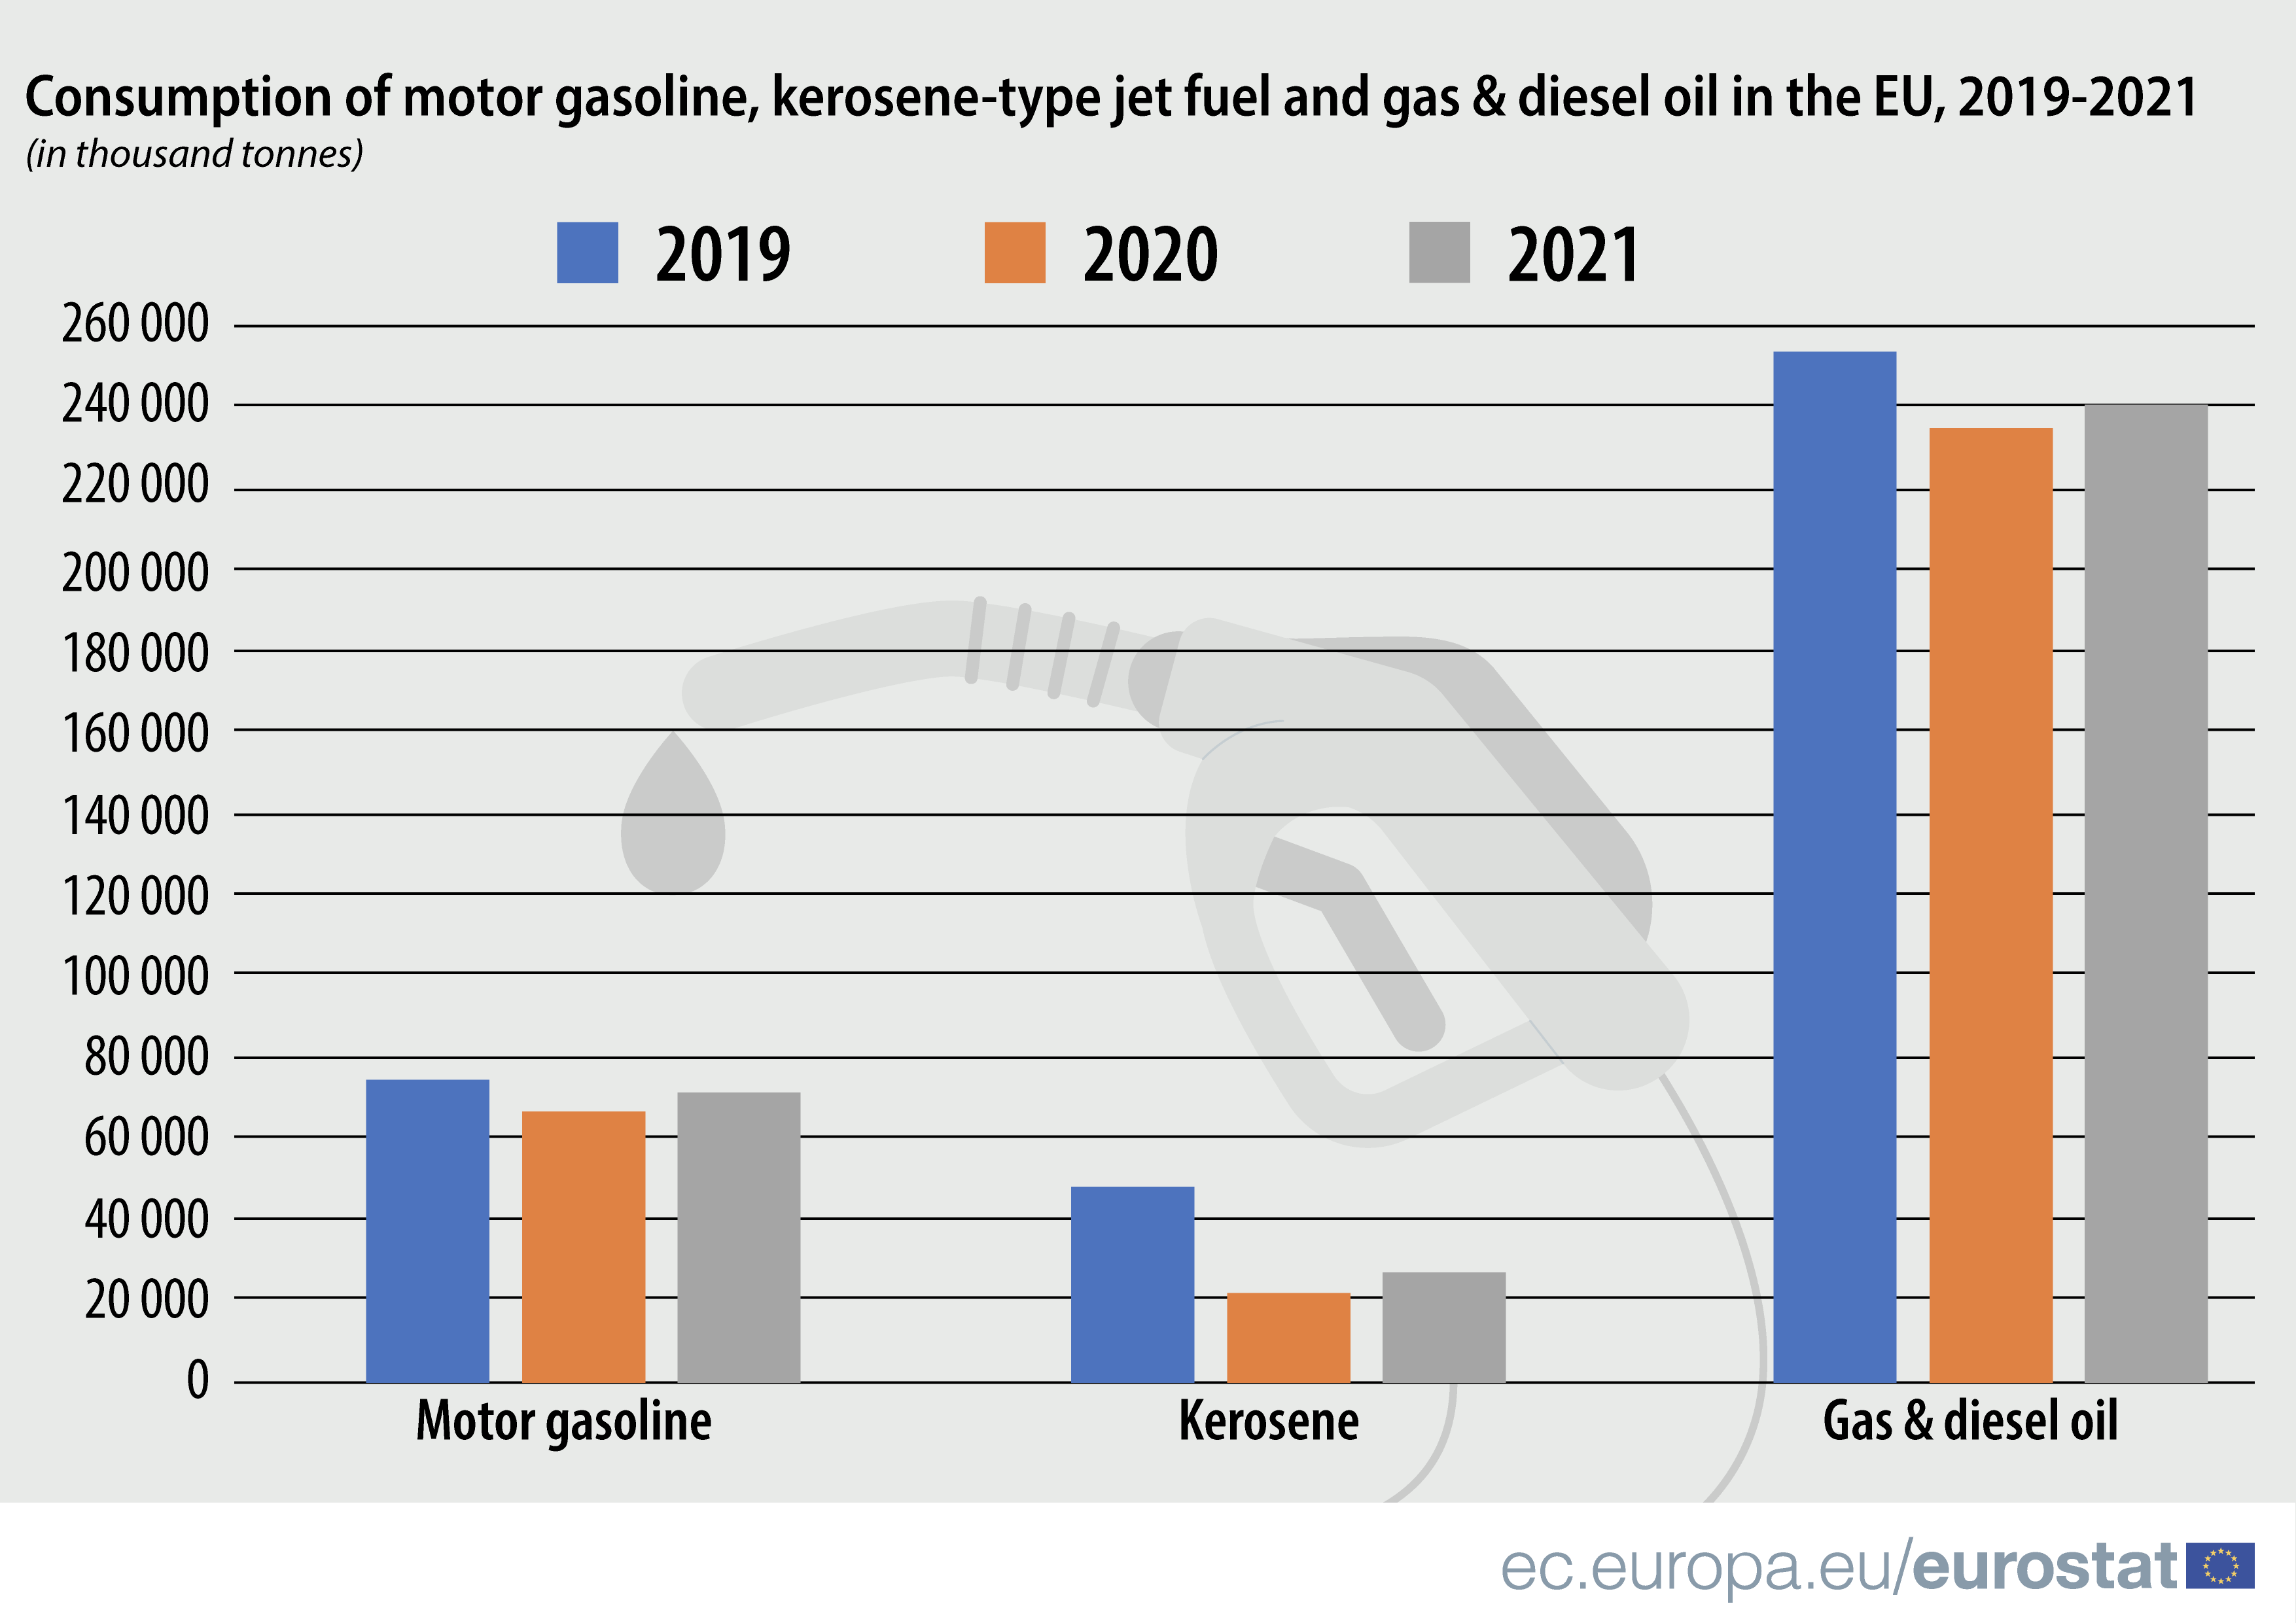 Fuels consumption still affected by COVID-19 in 2021